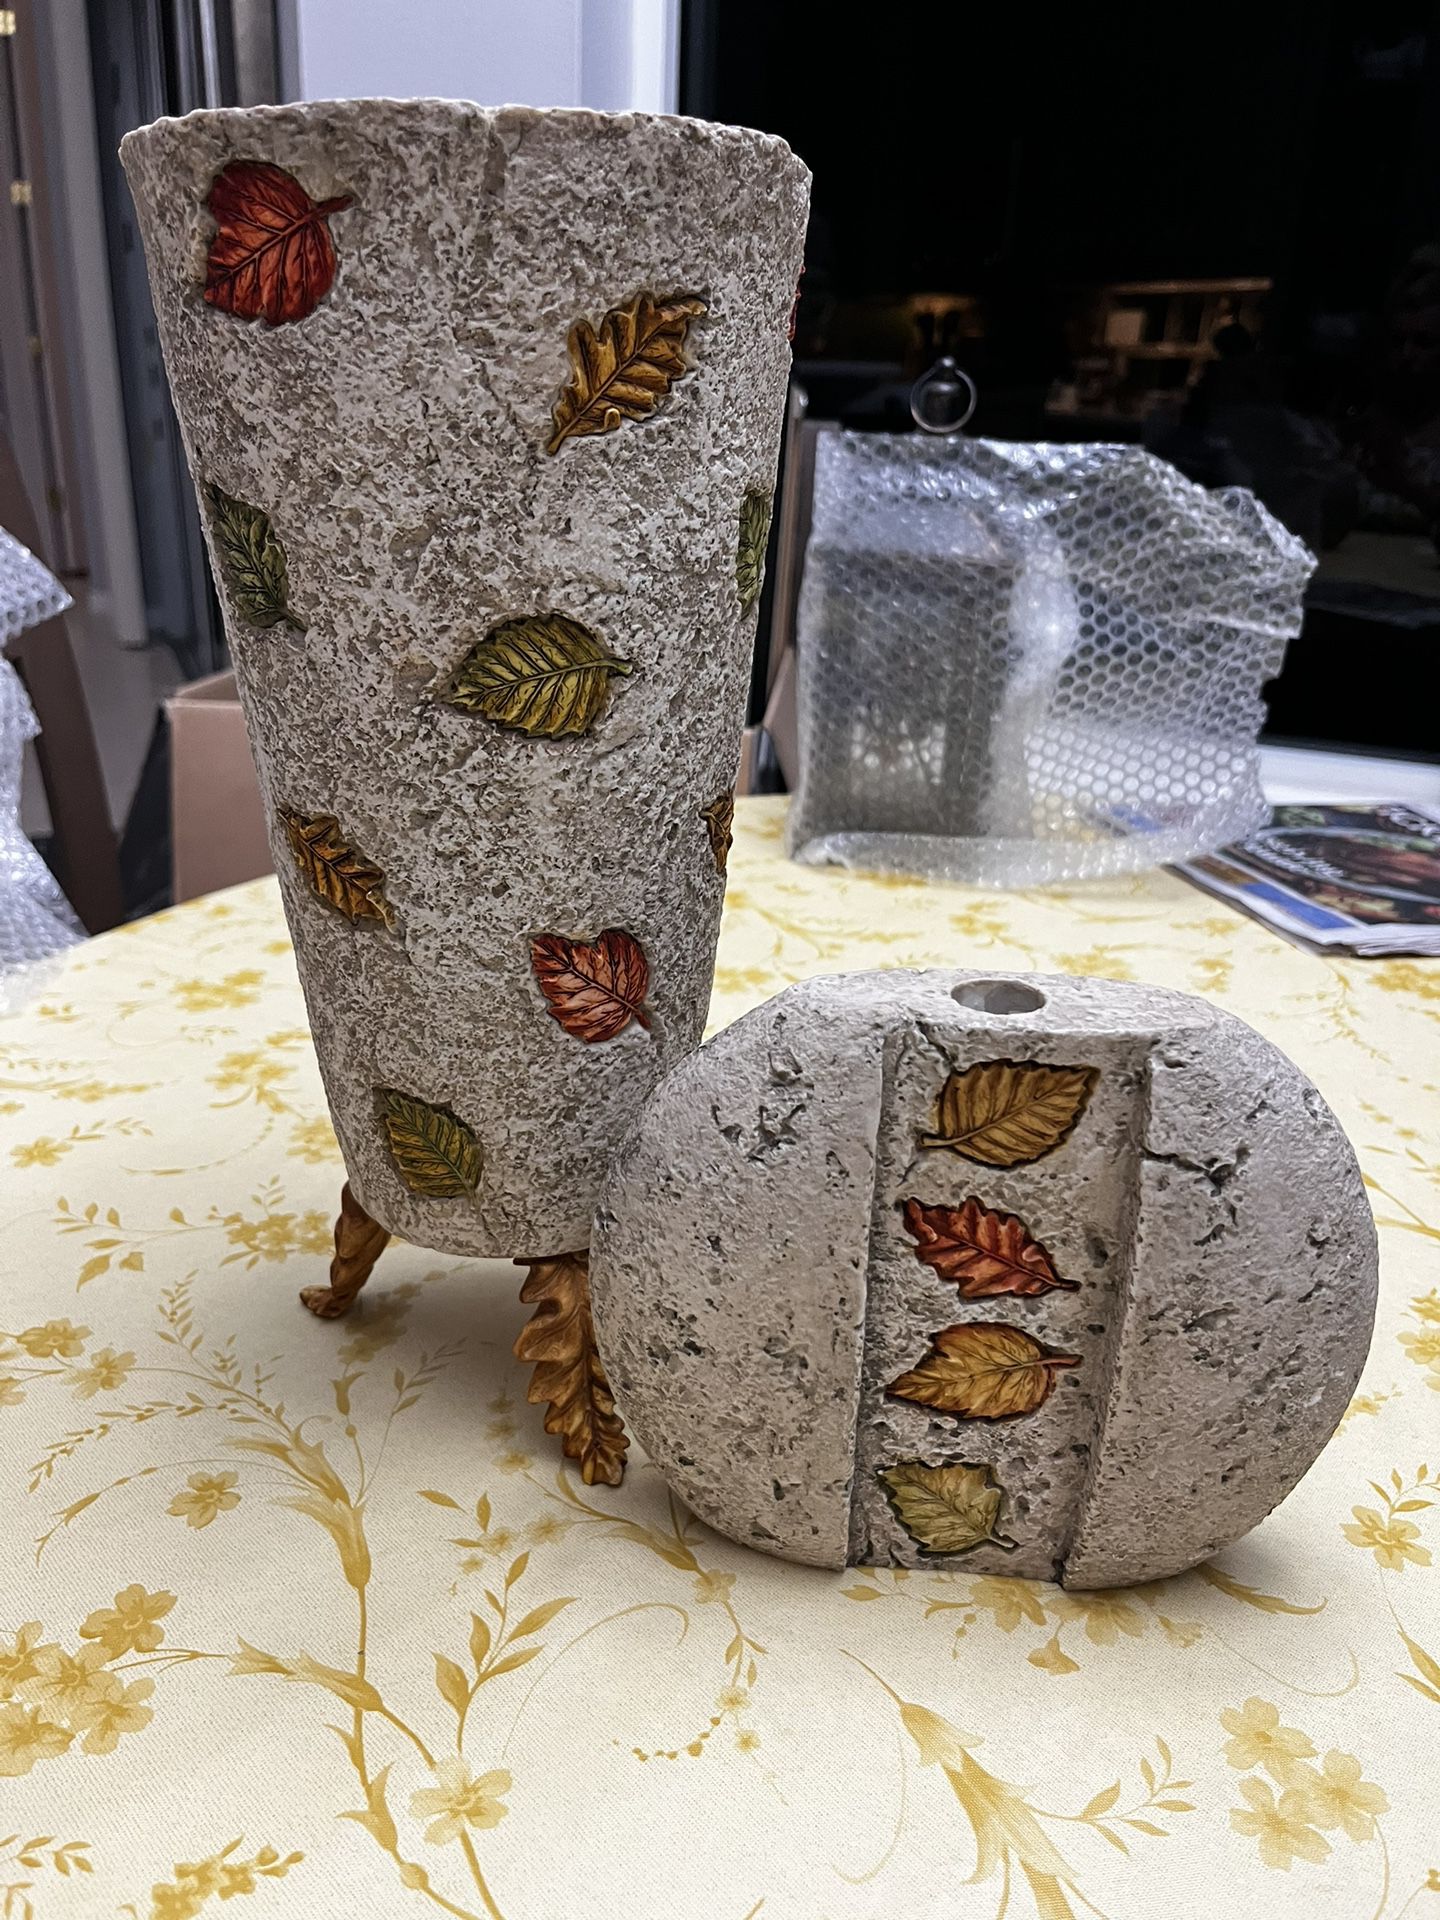 2 Vase Or Small Candle Holder 13x5x3.5” 6x6 $15